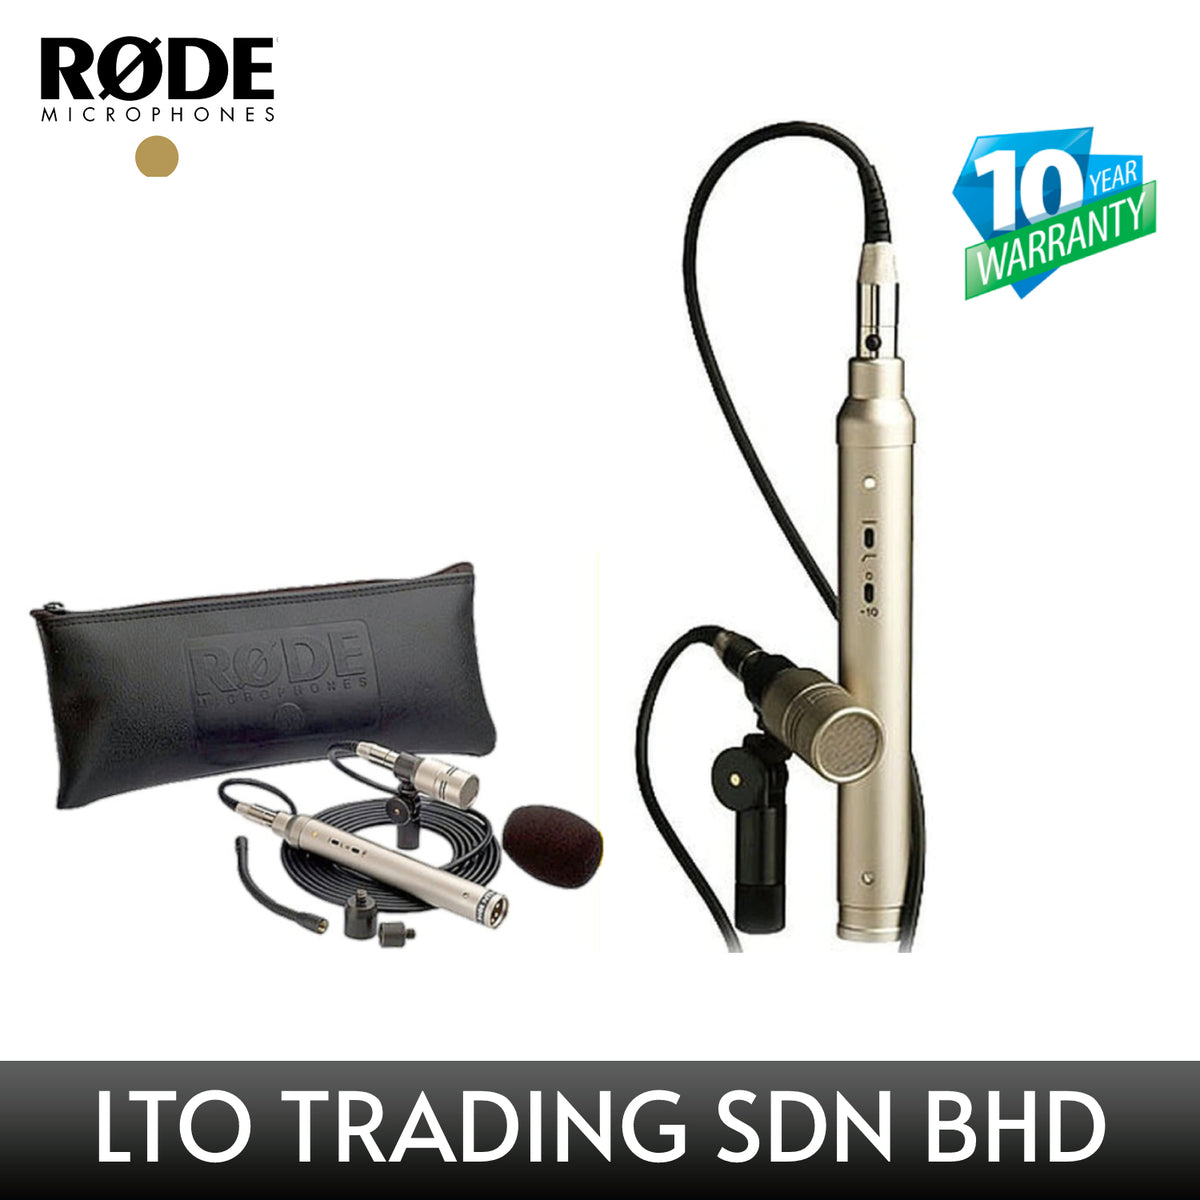 with　RODE　–　Address　NT6　and　Compact　SYSTEM　Design　Build　Condenser　Microphone　PA　MALAYSIA　Public　System